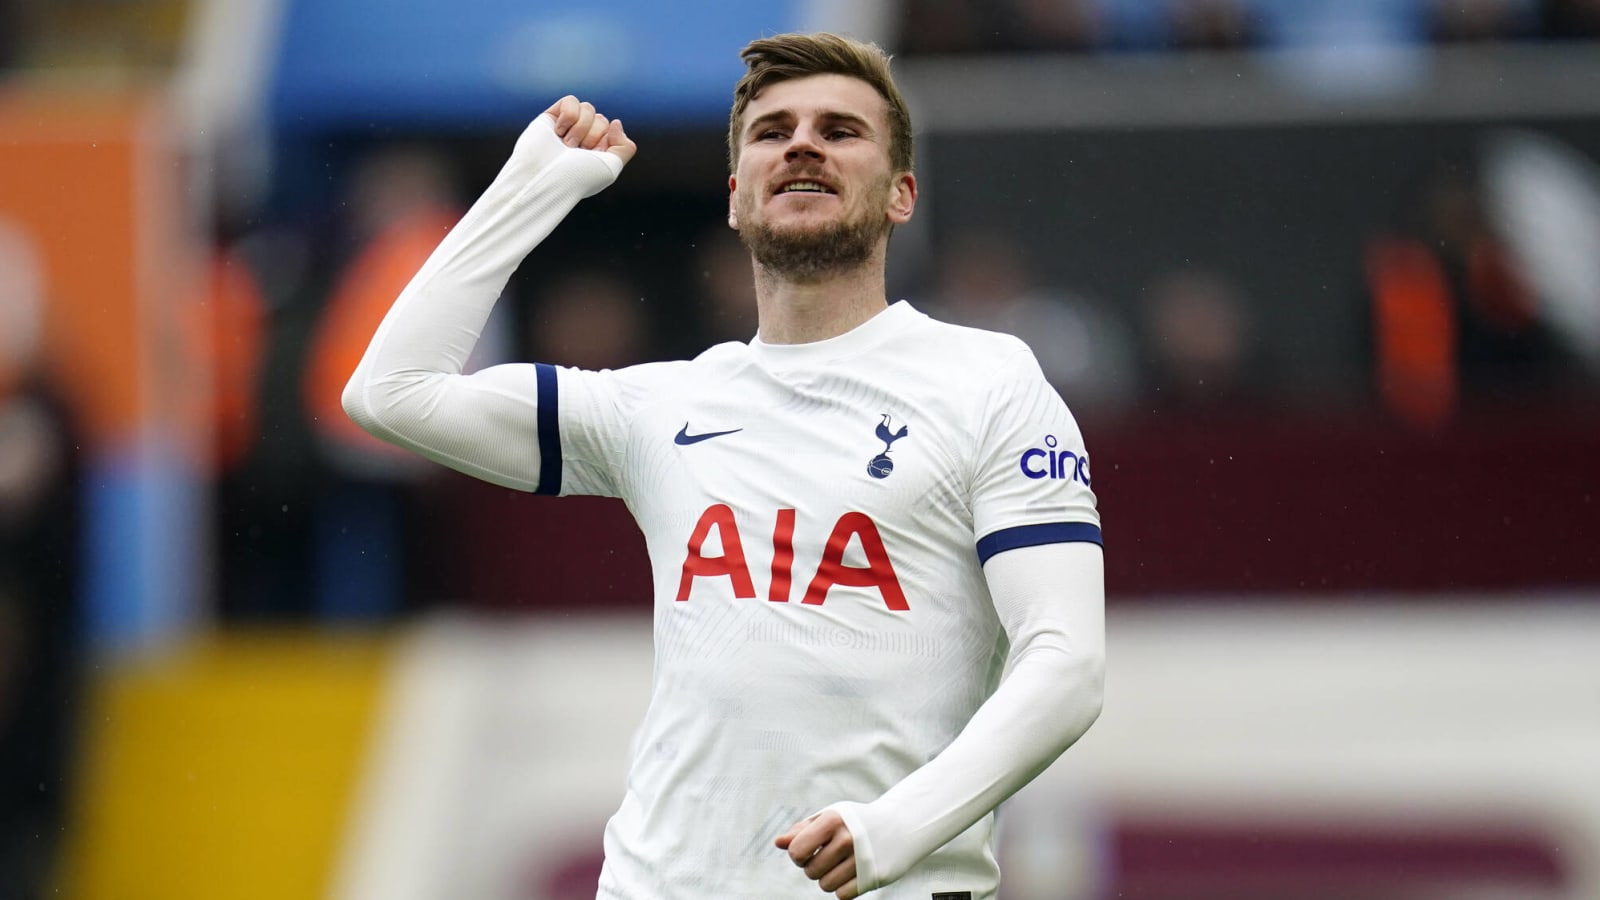 Tottenham told to move quickly or end up paying more for 28-year-old utility man